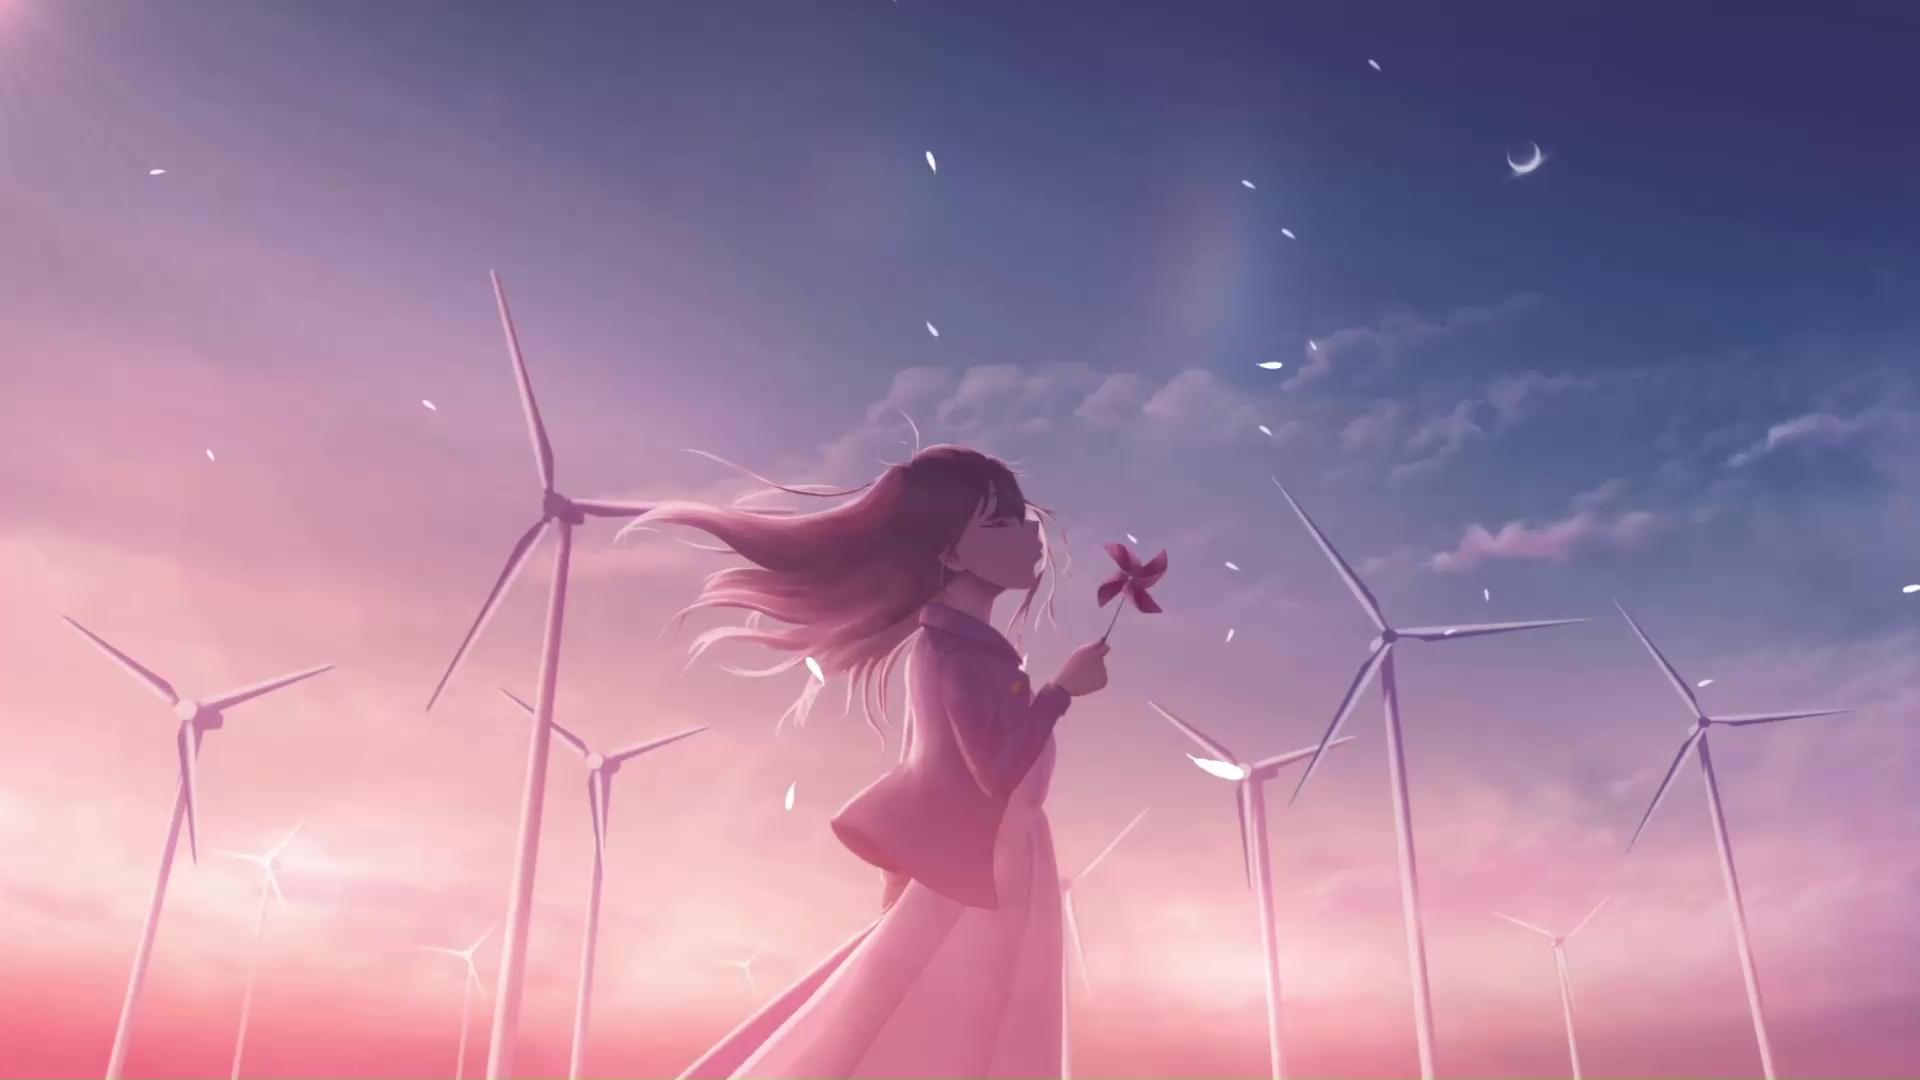 Wallpaper summer, the sky, the sun, windmill, girl, happy for mobile and  desktop, section арт, resolution 3840x2160 - download